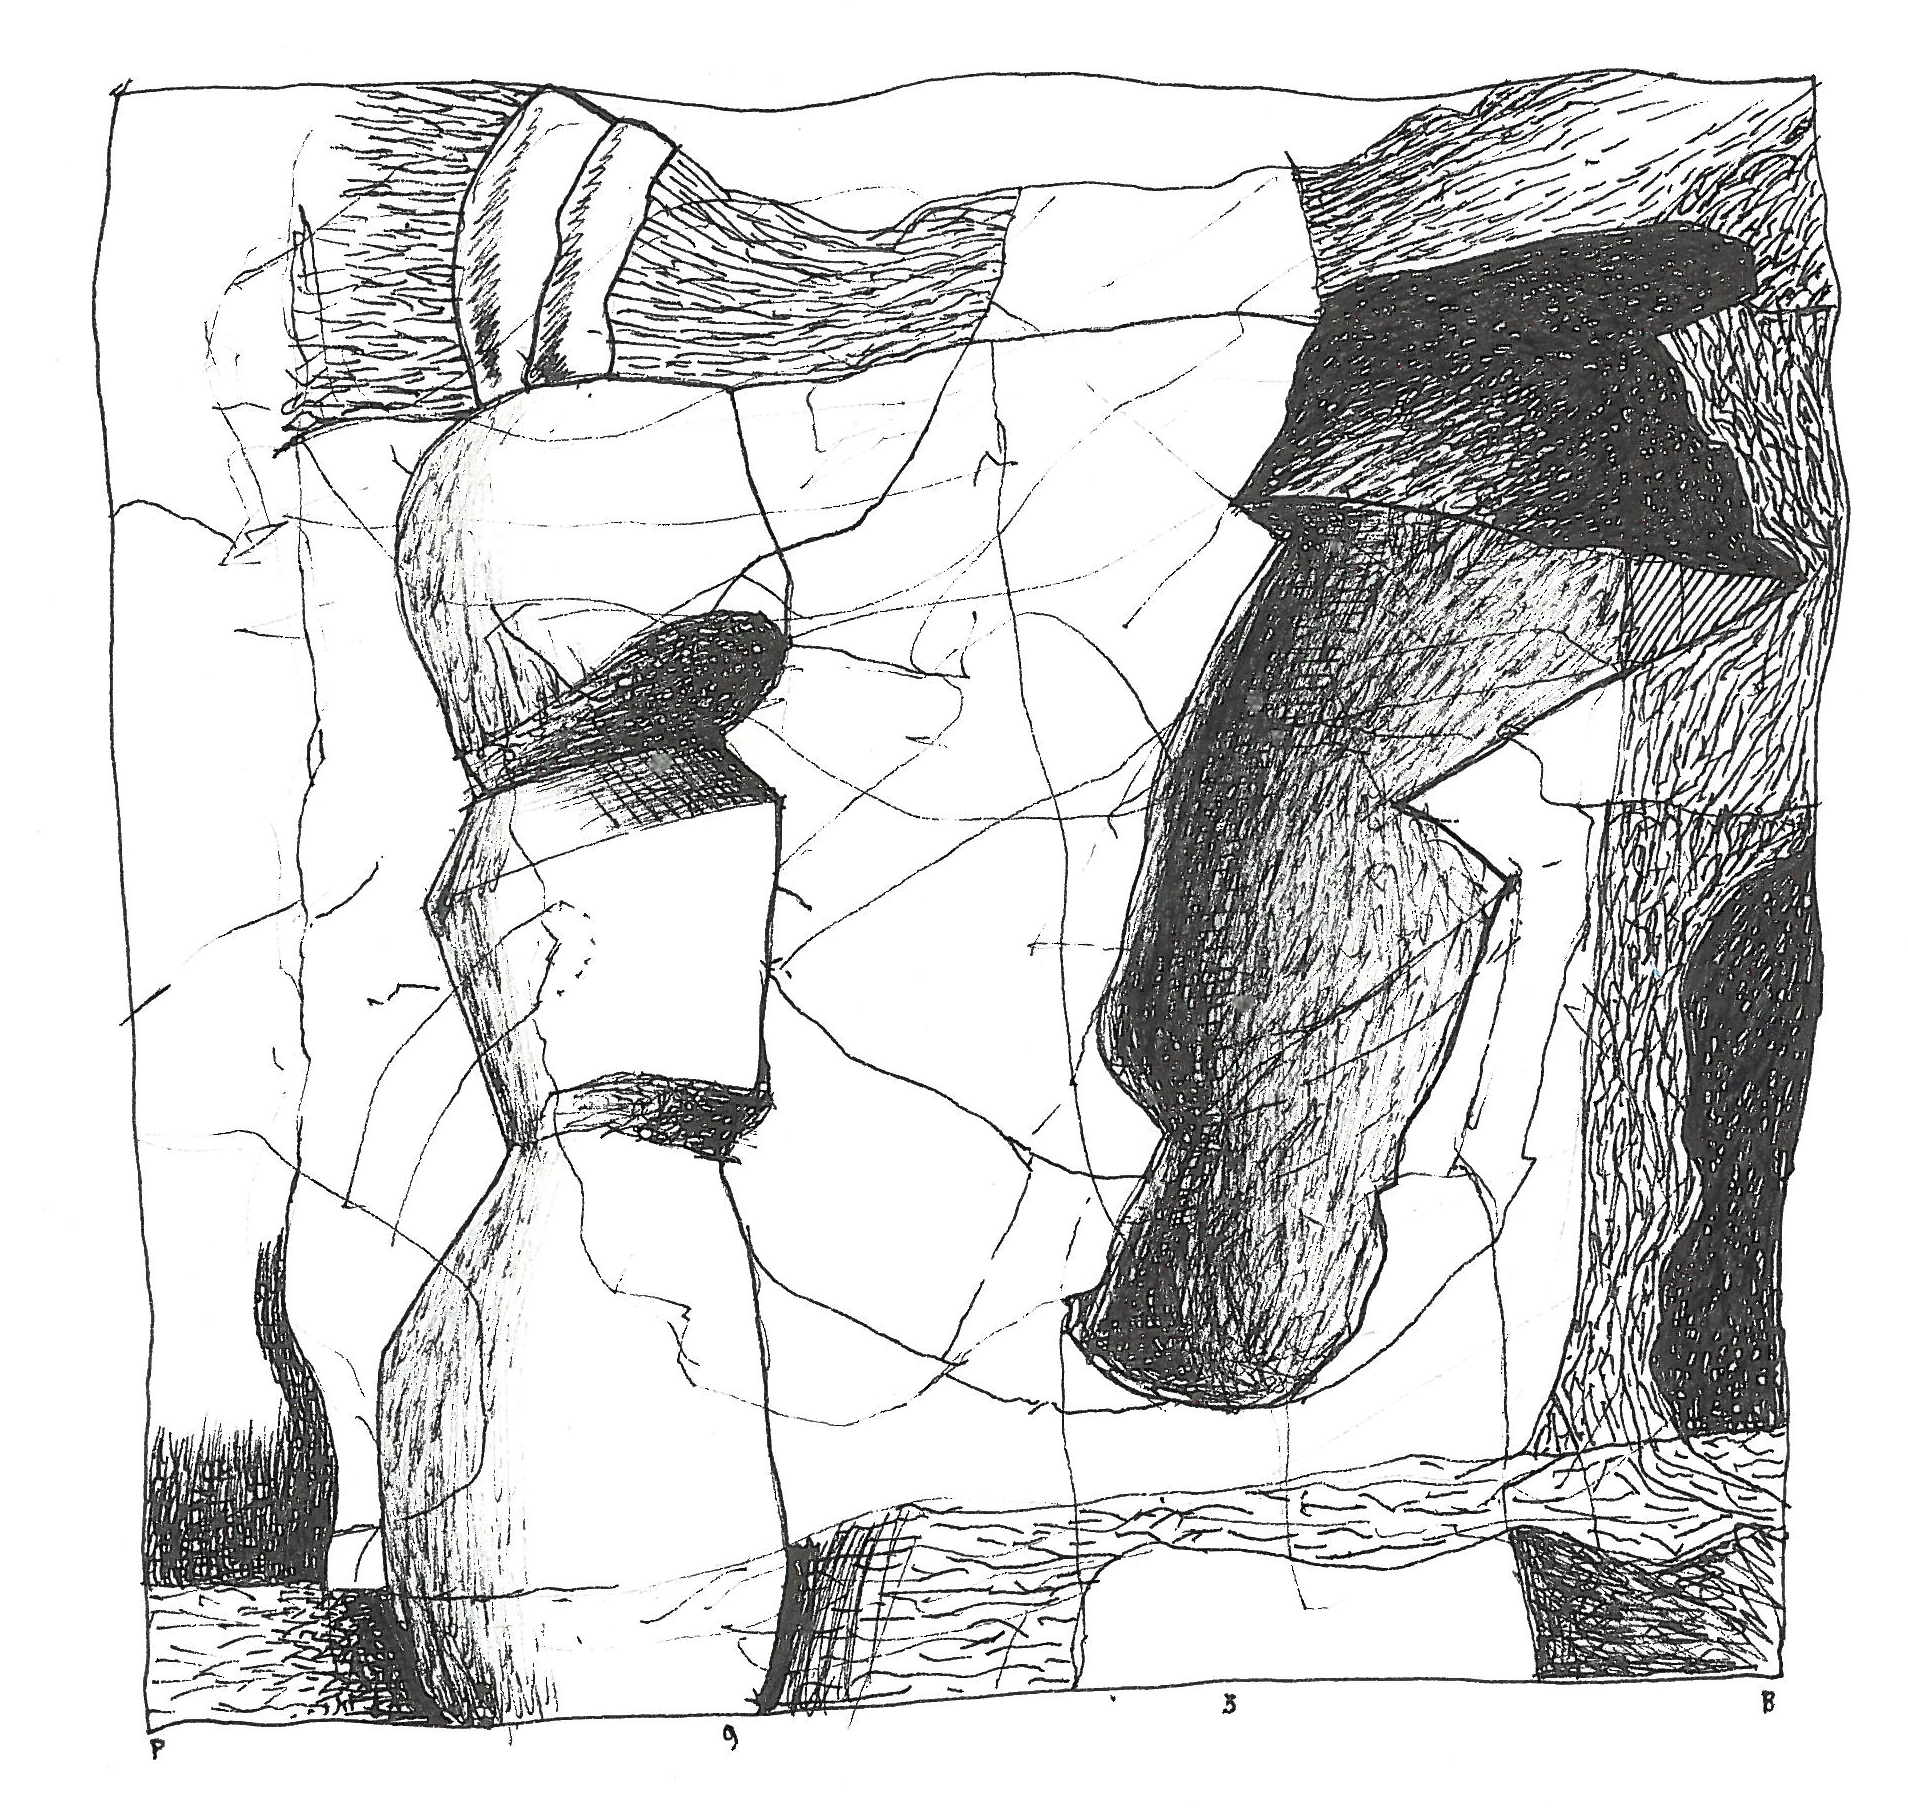  Pen and Ink - 5.25" x 5.25" - 1993  